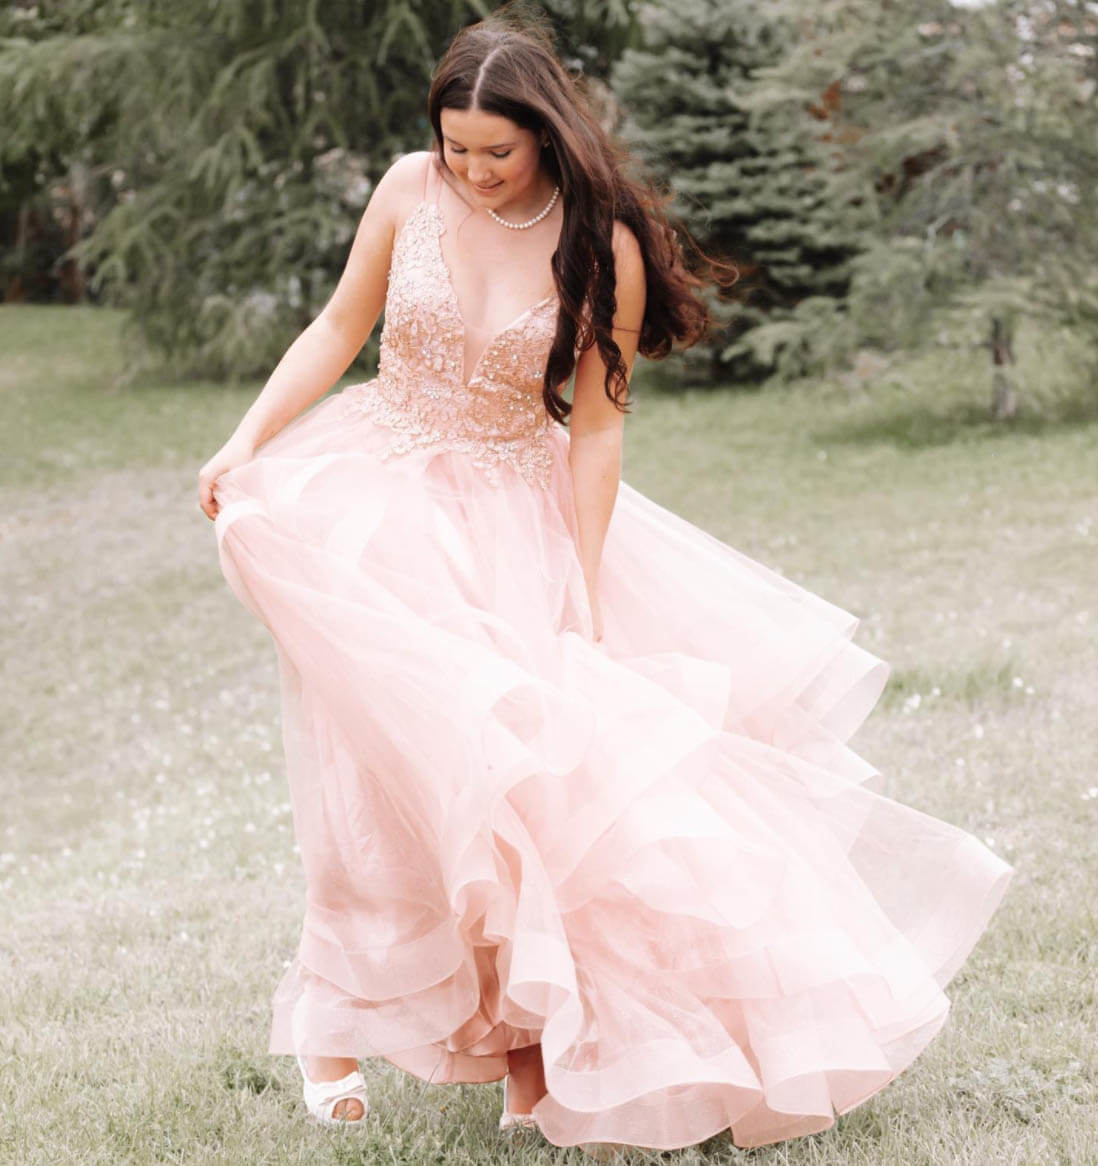 Model wearing a pink gown